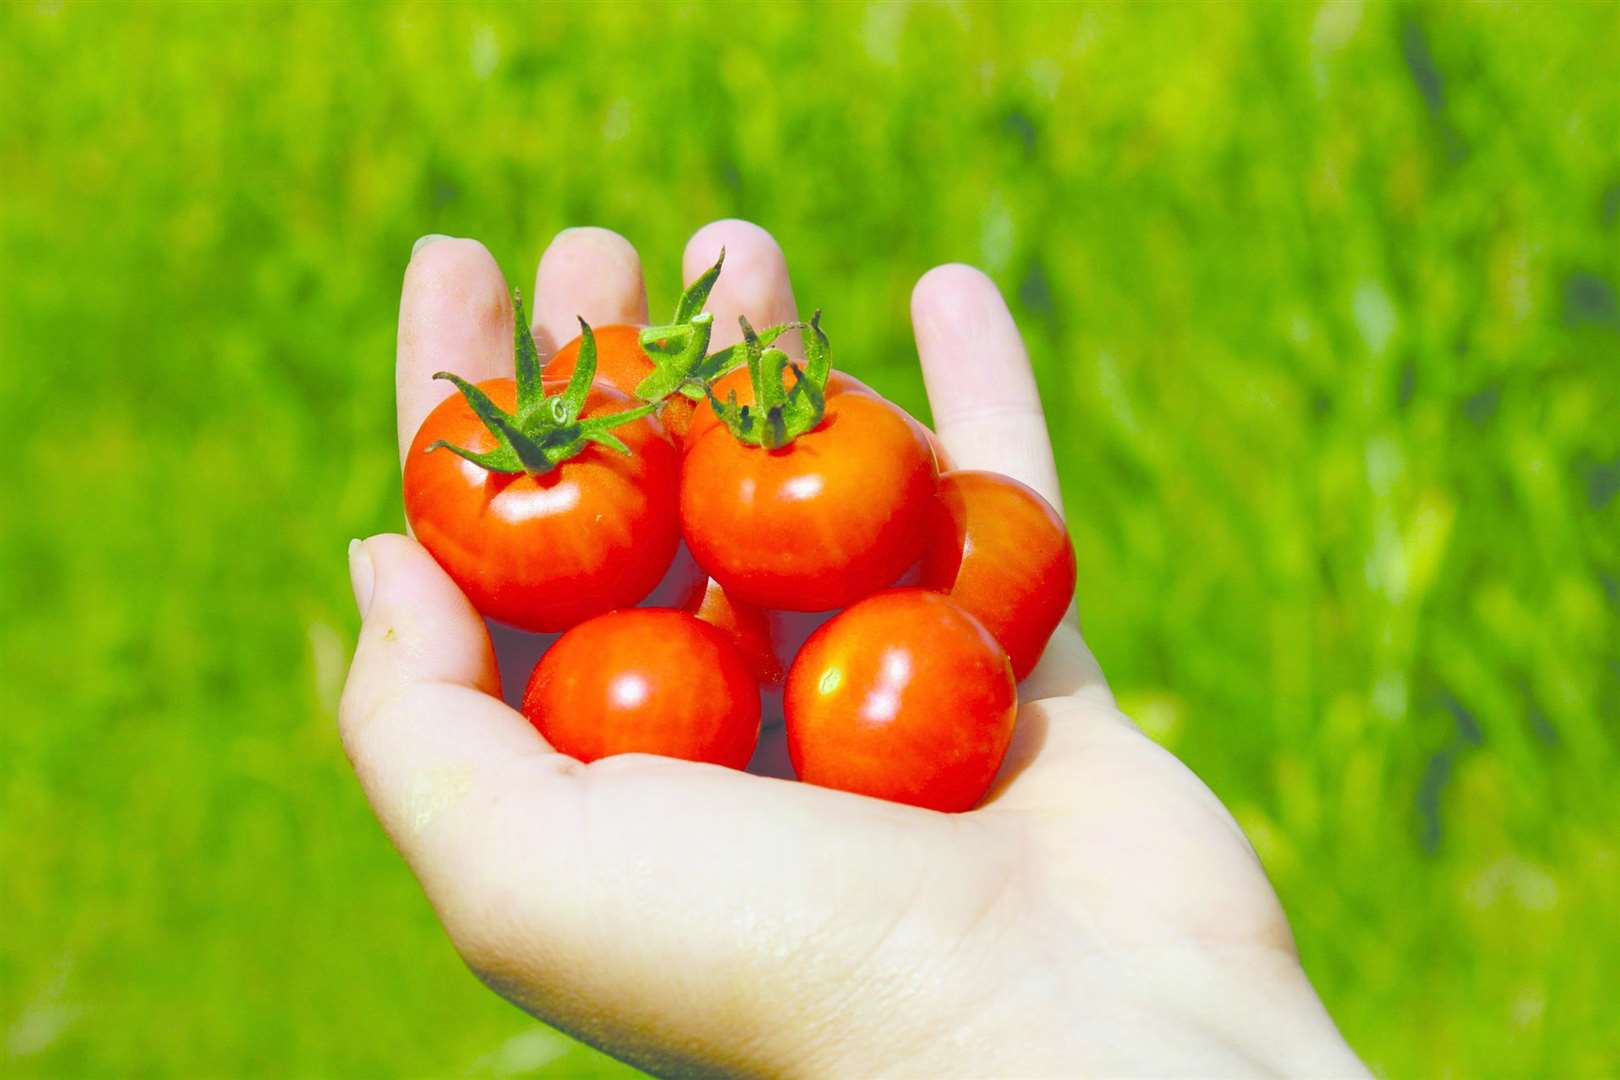 A fine crop of tomatoes